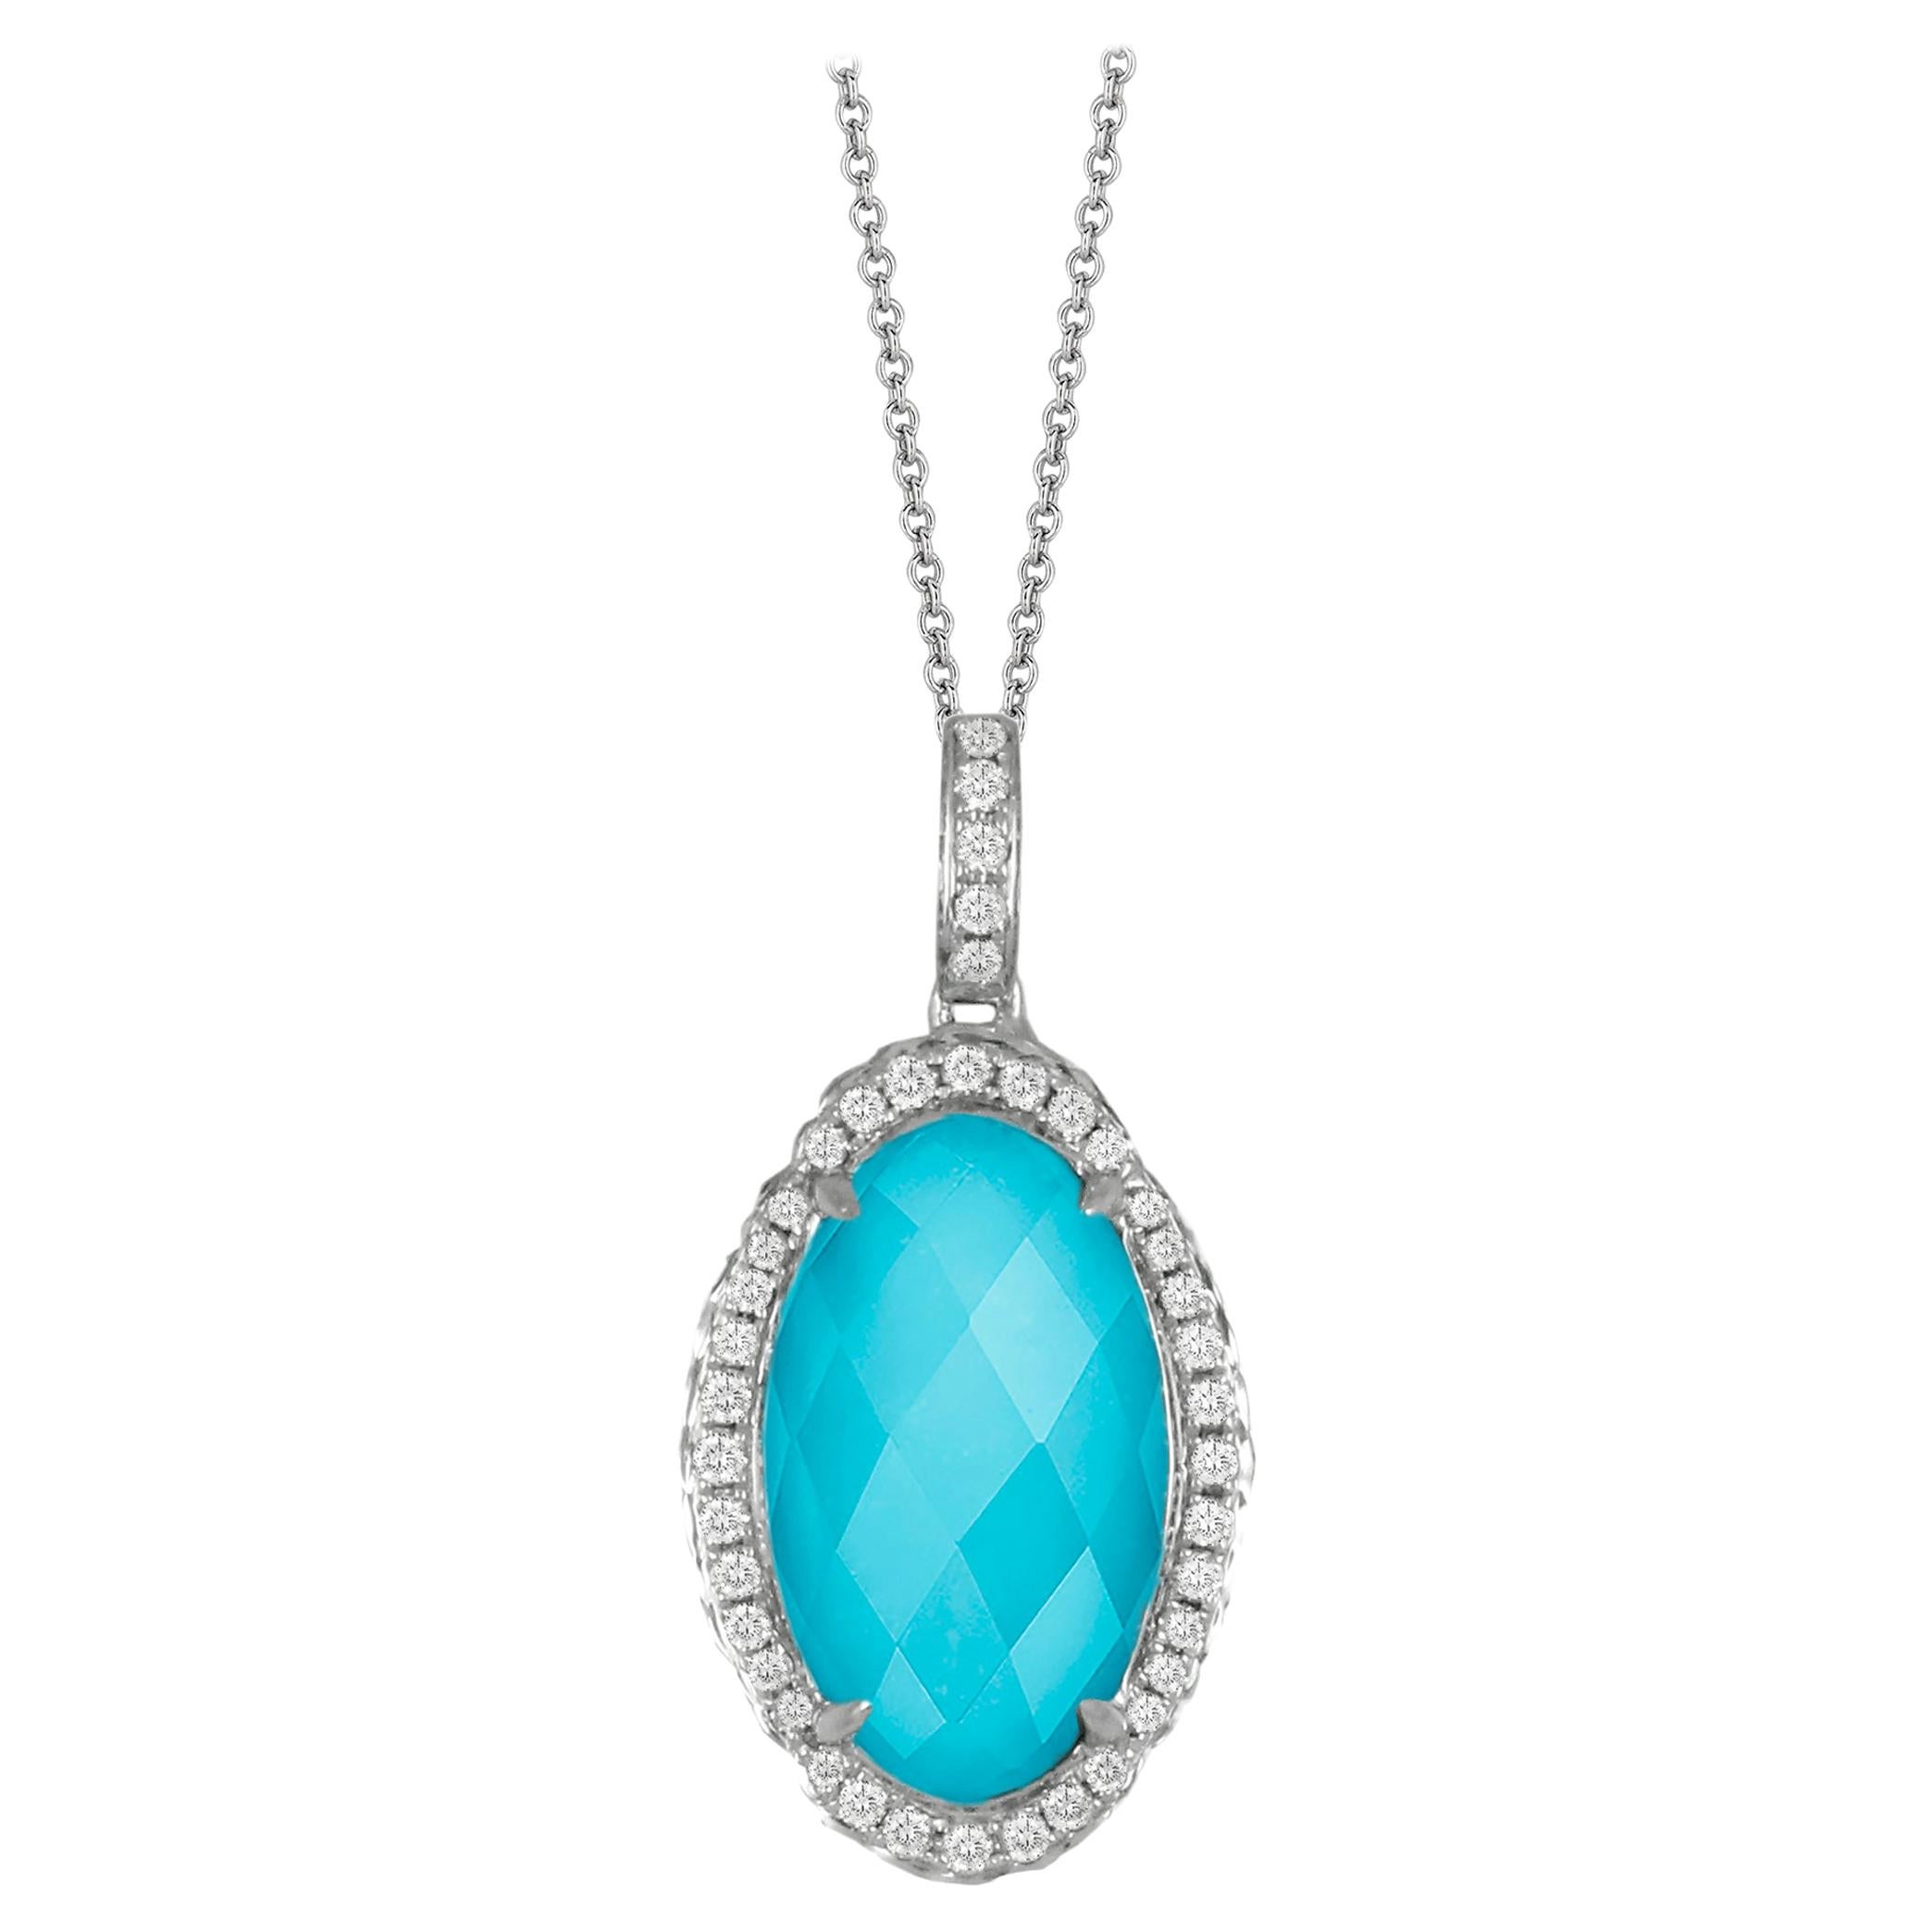 Doves 18 Karat White Gold Oval Necklace with White Topaz, Turquoise and Diamonds